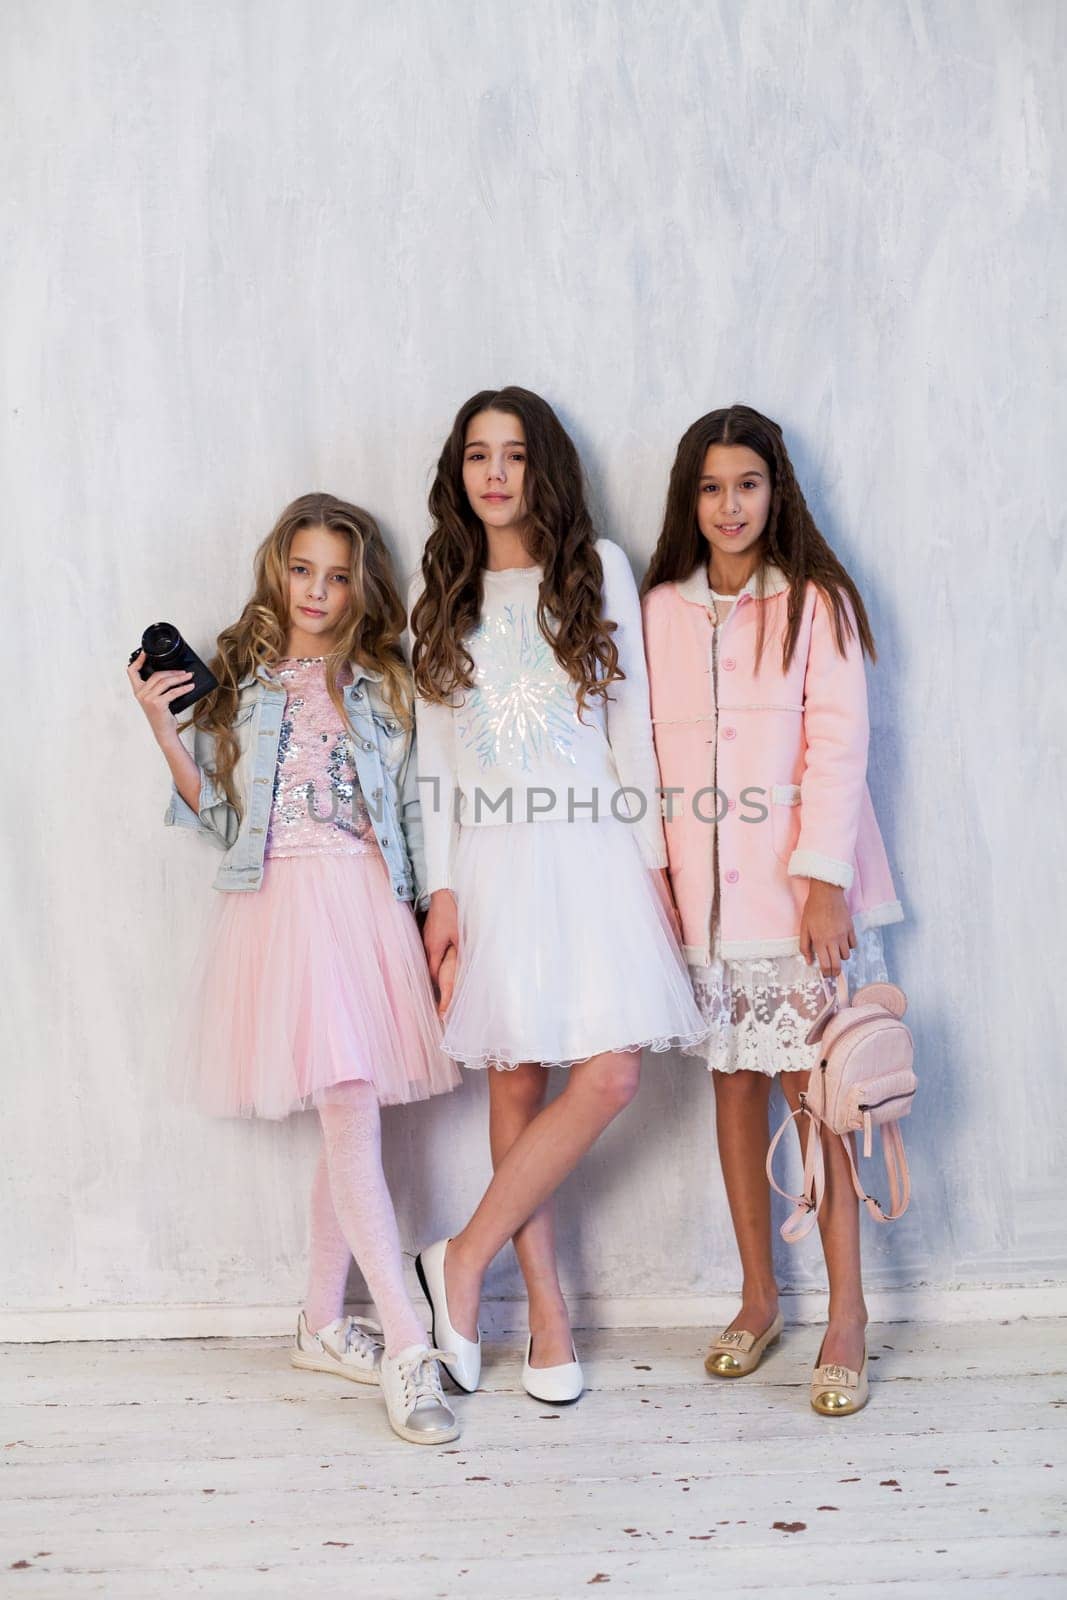 Three beautiful little girls with a camera at a photo shoot